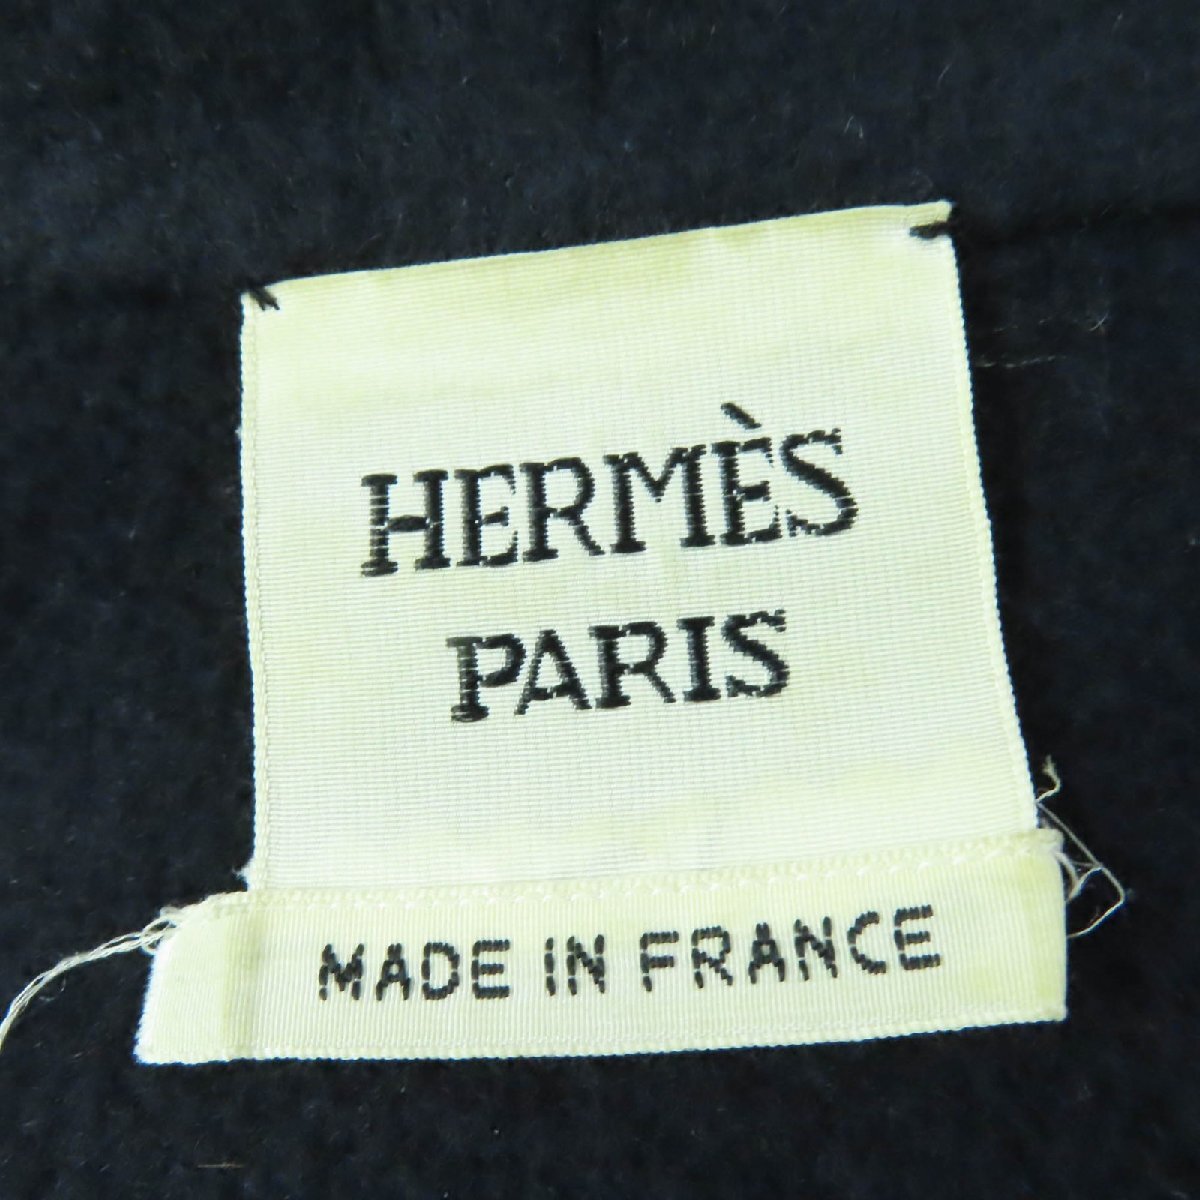  beautiful goods *HERMES Hermes cashmere 100% leather using ro cover ru poncho coat navy Red Bull -36 France made lady's 